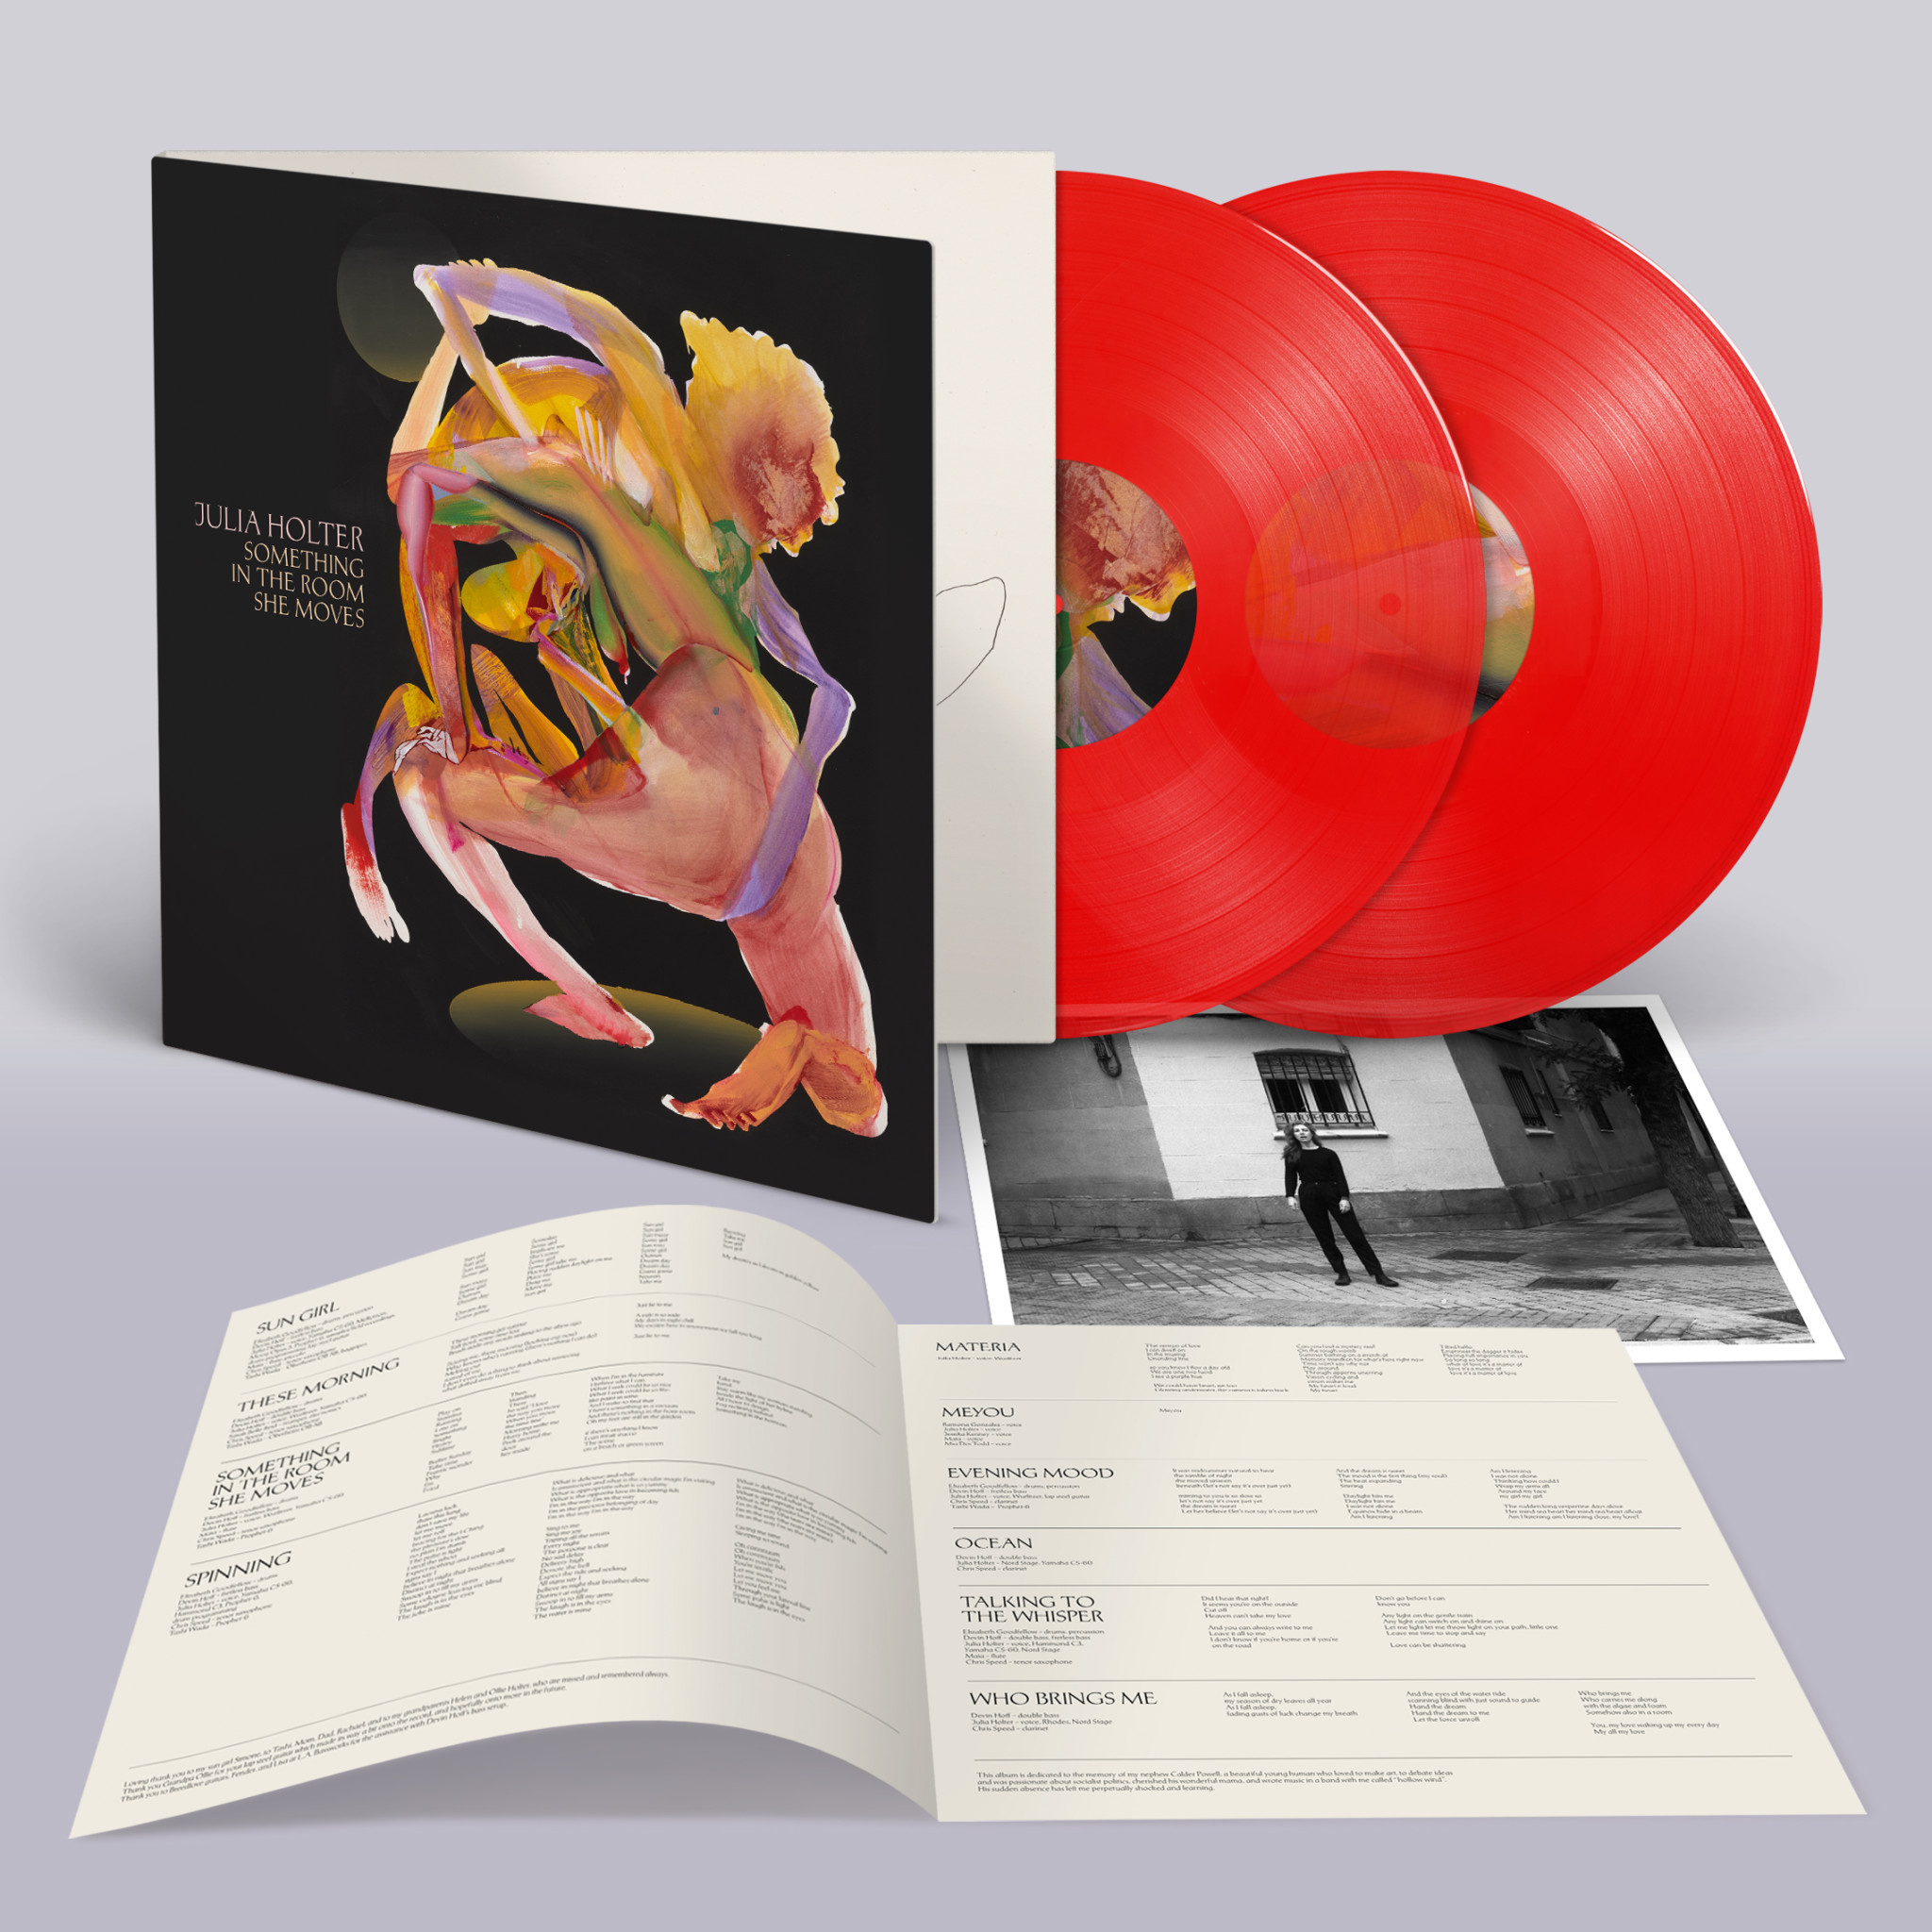 Domino Records [w/SIGNED PRINT] Julia Holter - Something in the Room She Moves (Red Vinyl)